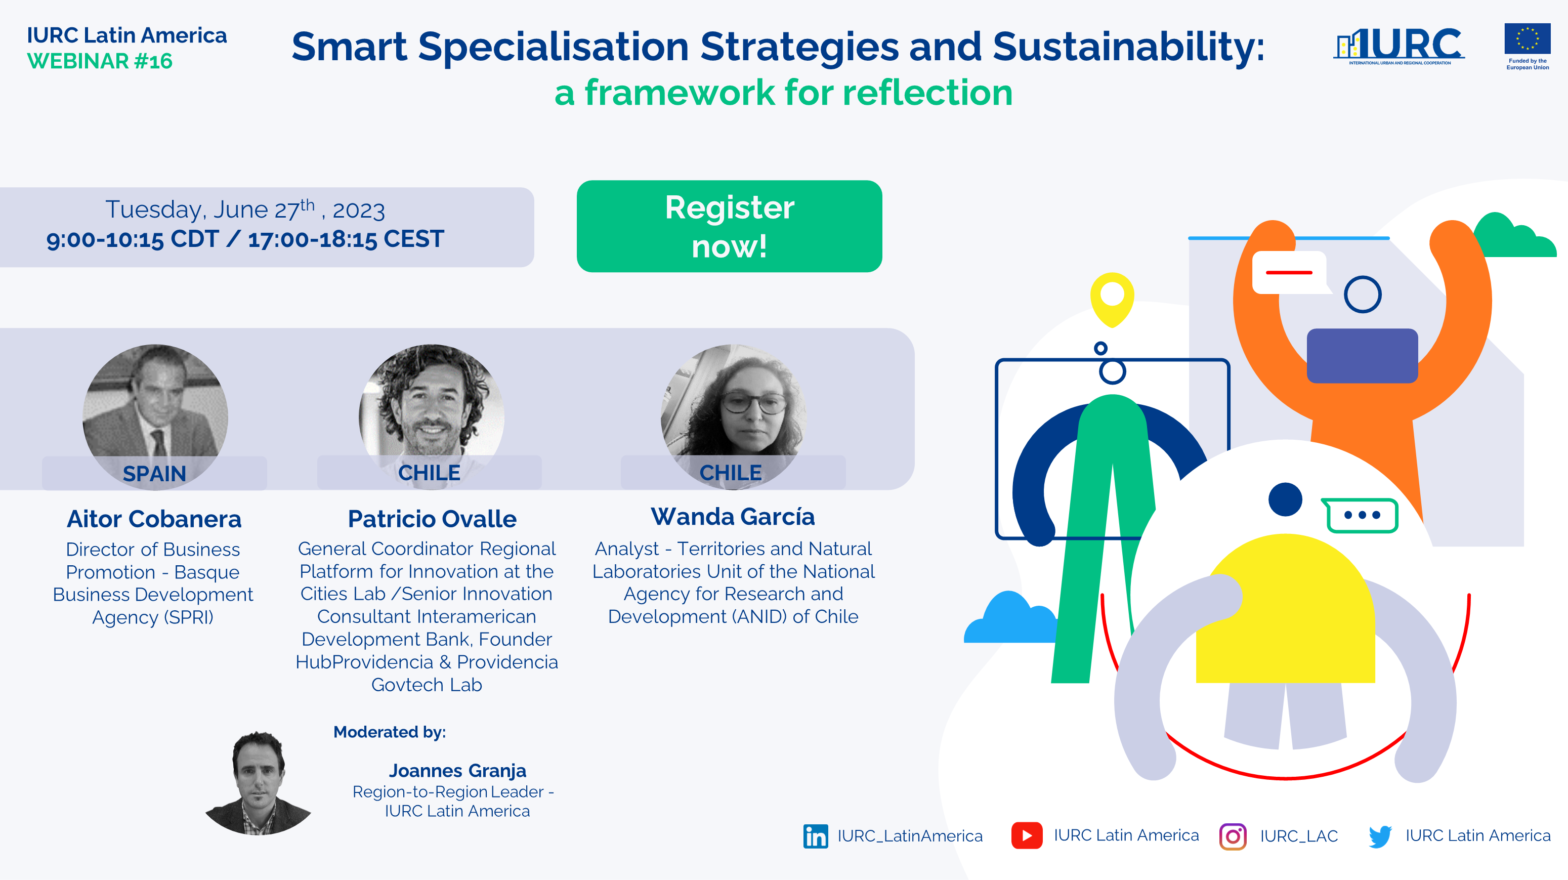 Webinar 16 “Smart Specialisation Strategies and Sustainability: a framework for reflection”